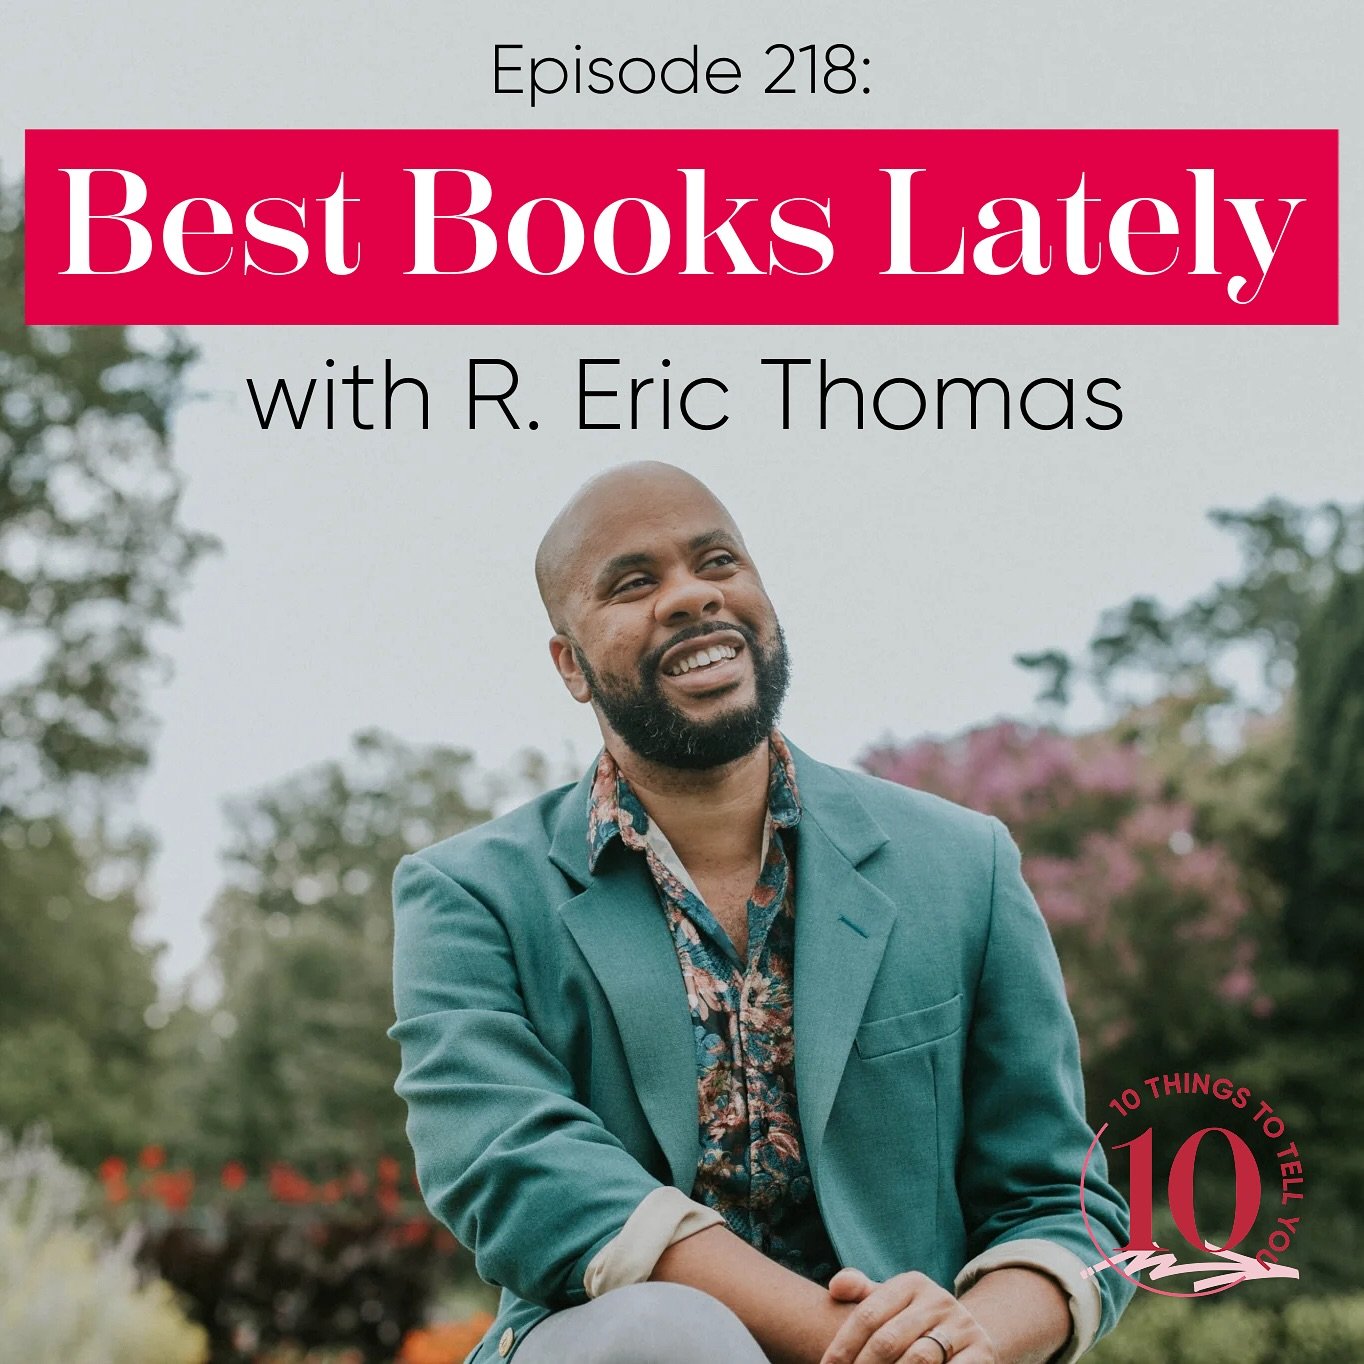 Book episodes are the best!! 🎉 And in this week&rsquo;s episode I am full blown fangirling over my guest @oureric. 

Eric is an author and playwright and tv writer and I have loved reading his words for years. His latest book is called Congratulatio